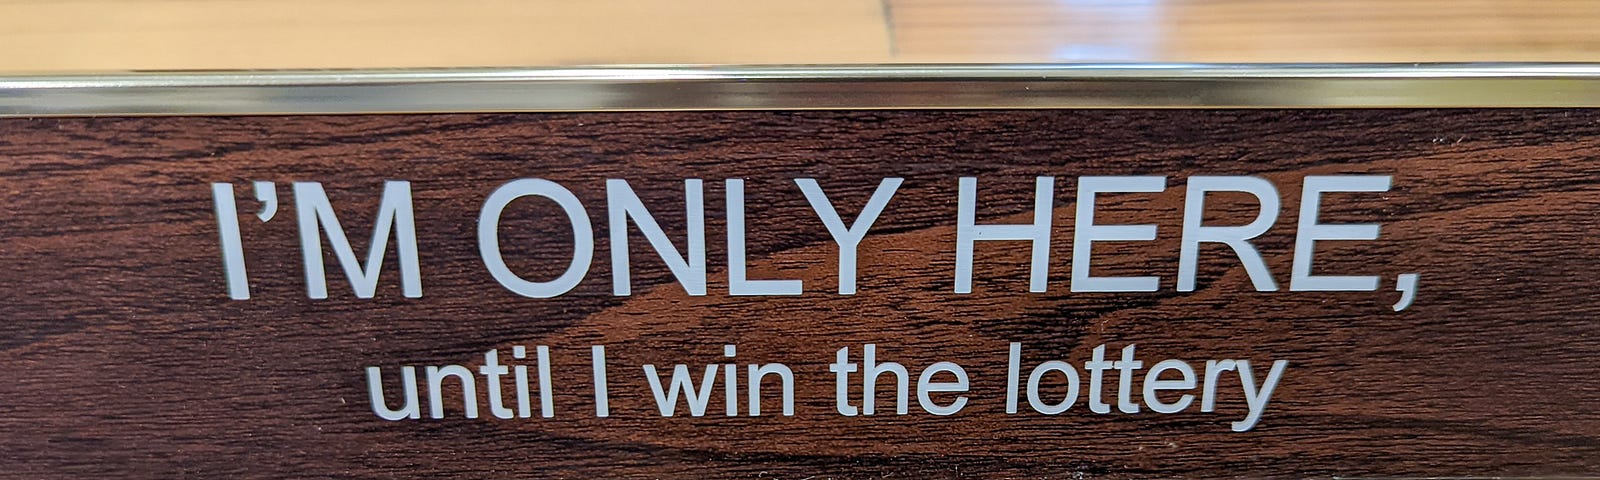 Desk placard reading “I’M ONLY HERE, until I win the lottery”. That’s one strategy, sure